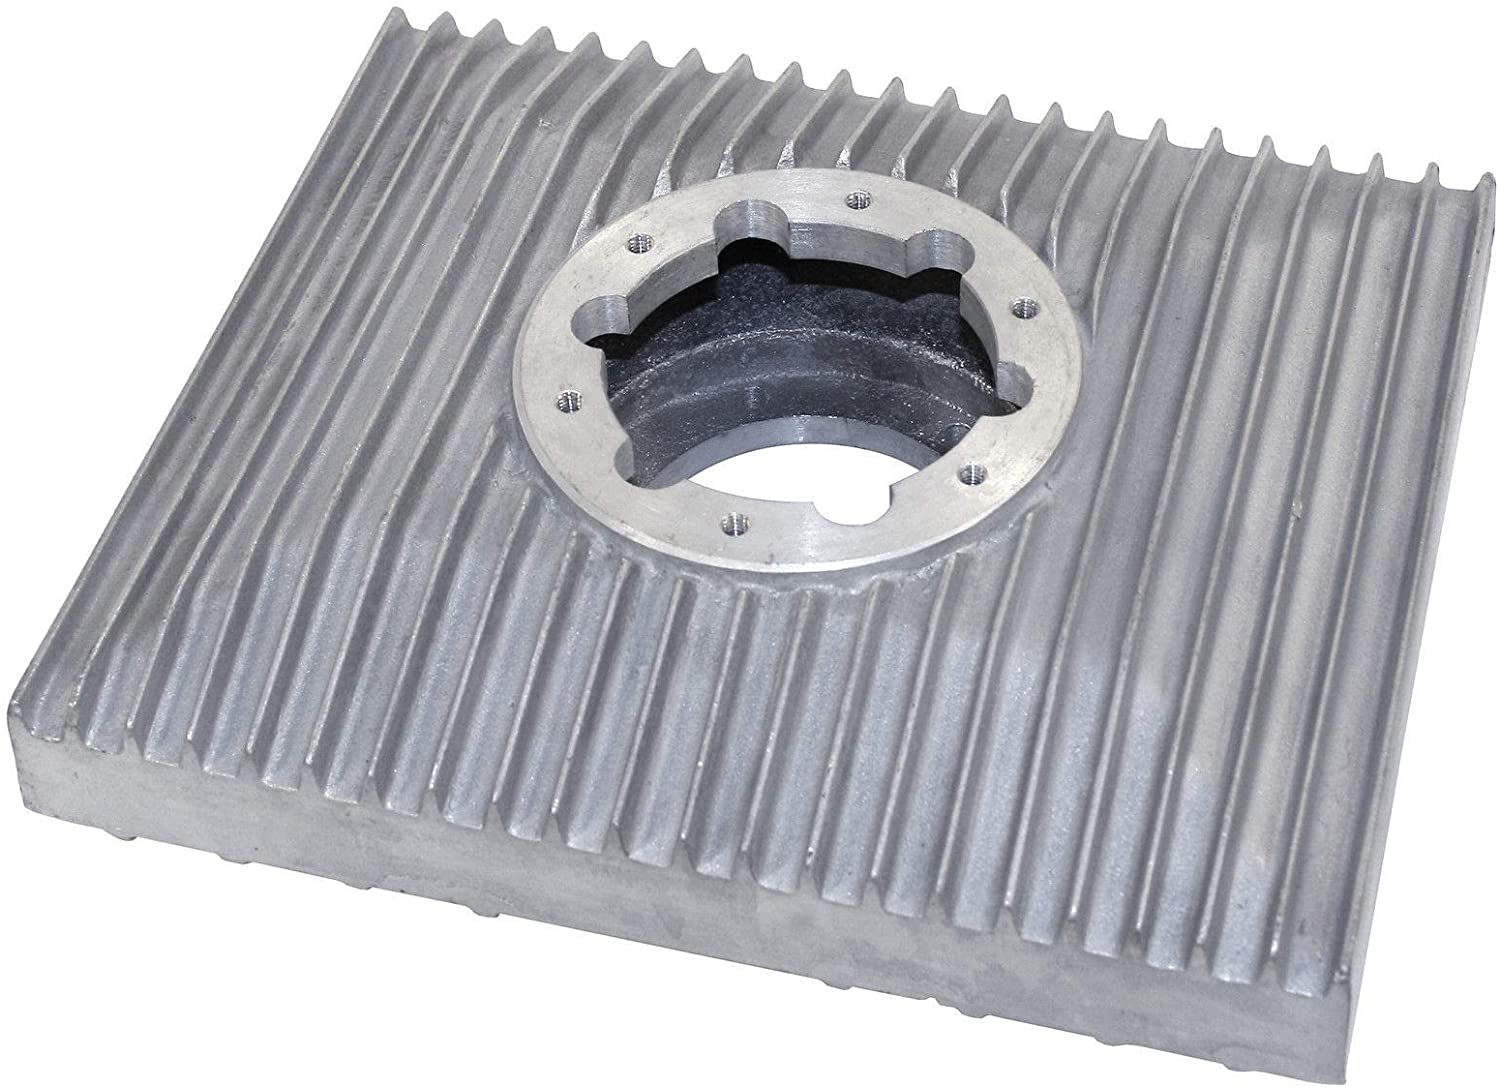 High Capacity Oil Sump, 1-1/2 Quart Extra, Fits Aircooled VW, Compatible with Dune Buggy